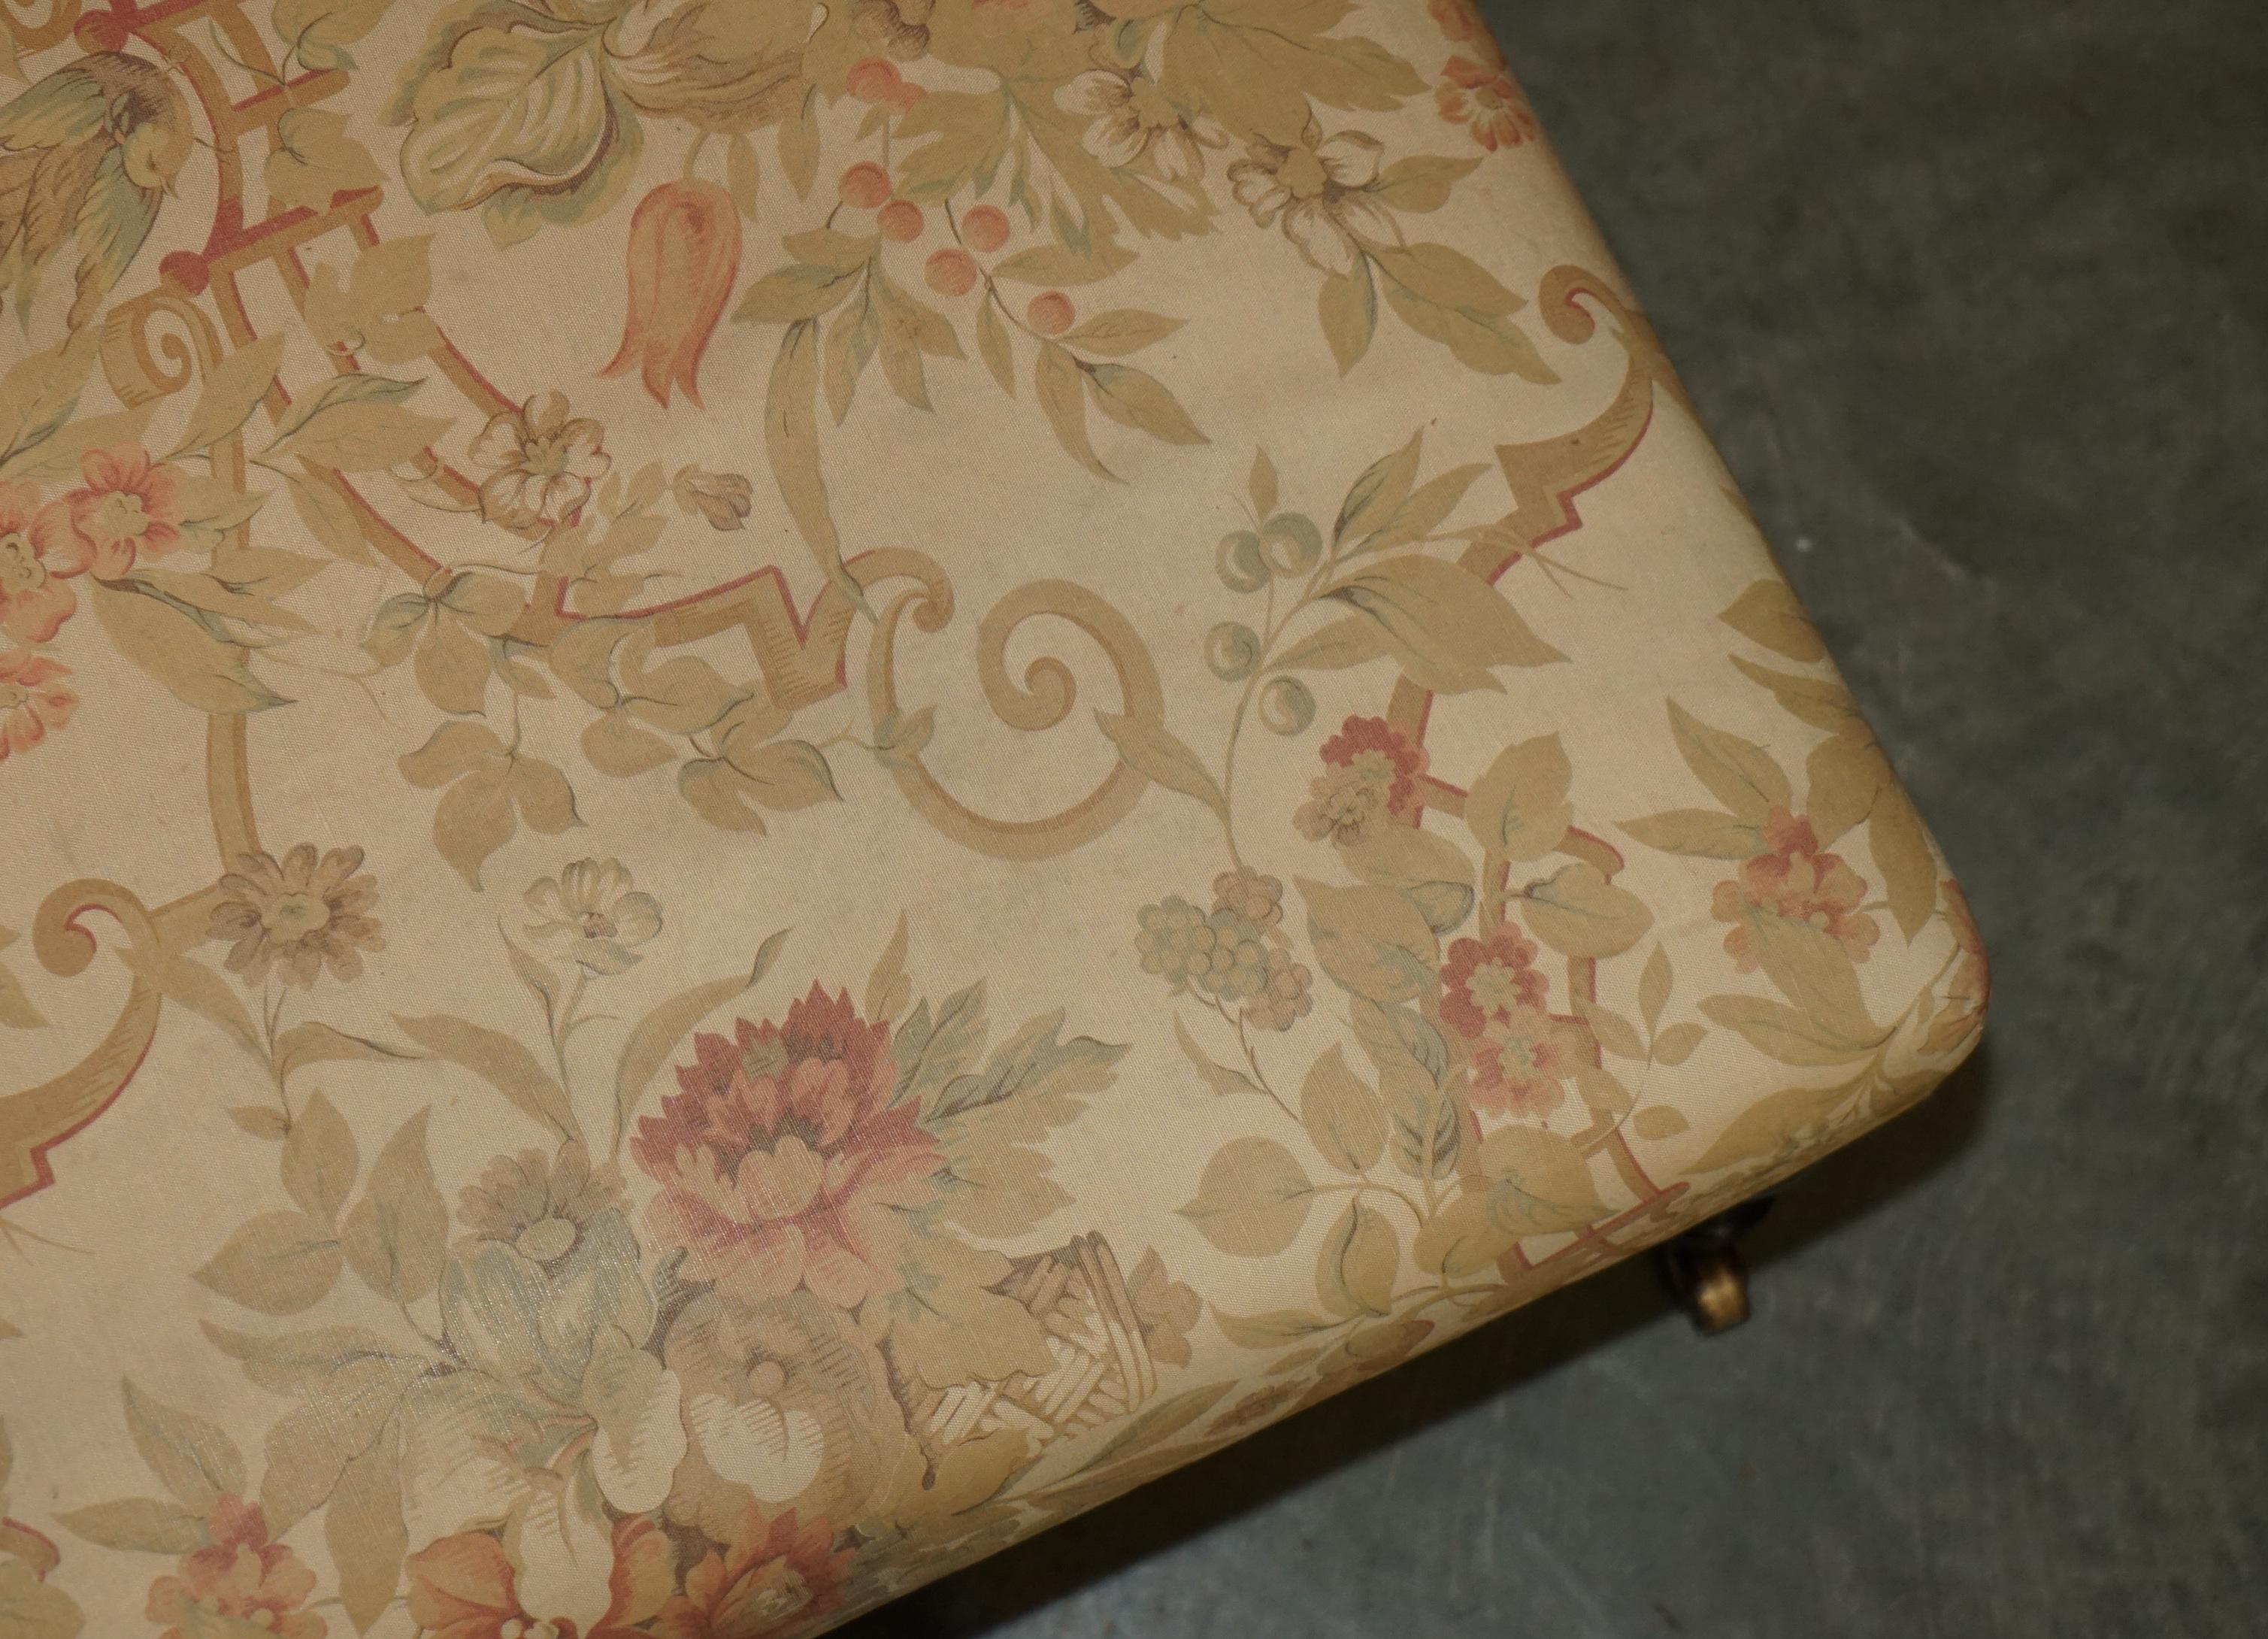 COLLECTABLE VERY LARGE ViNTAGE GEORGE SMITH CHELSEA FLORAL FOOTSTOOL OTTOMAN 1